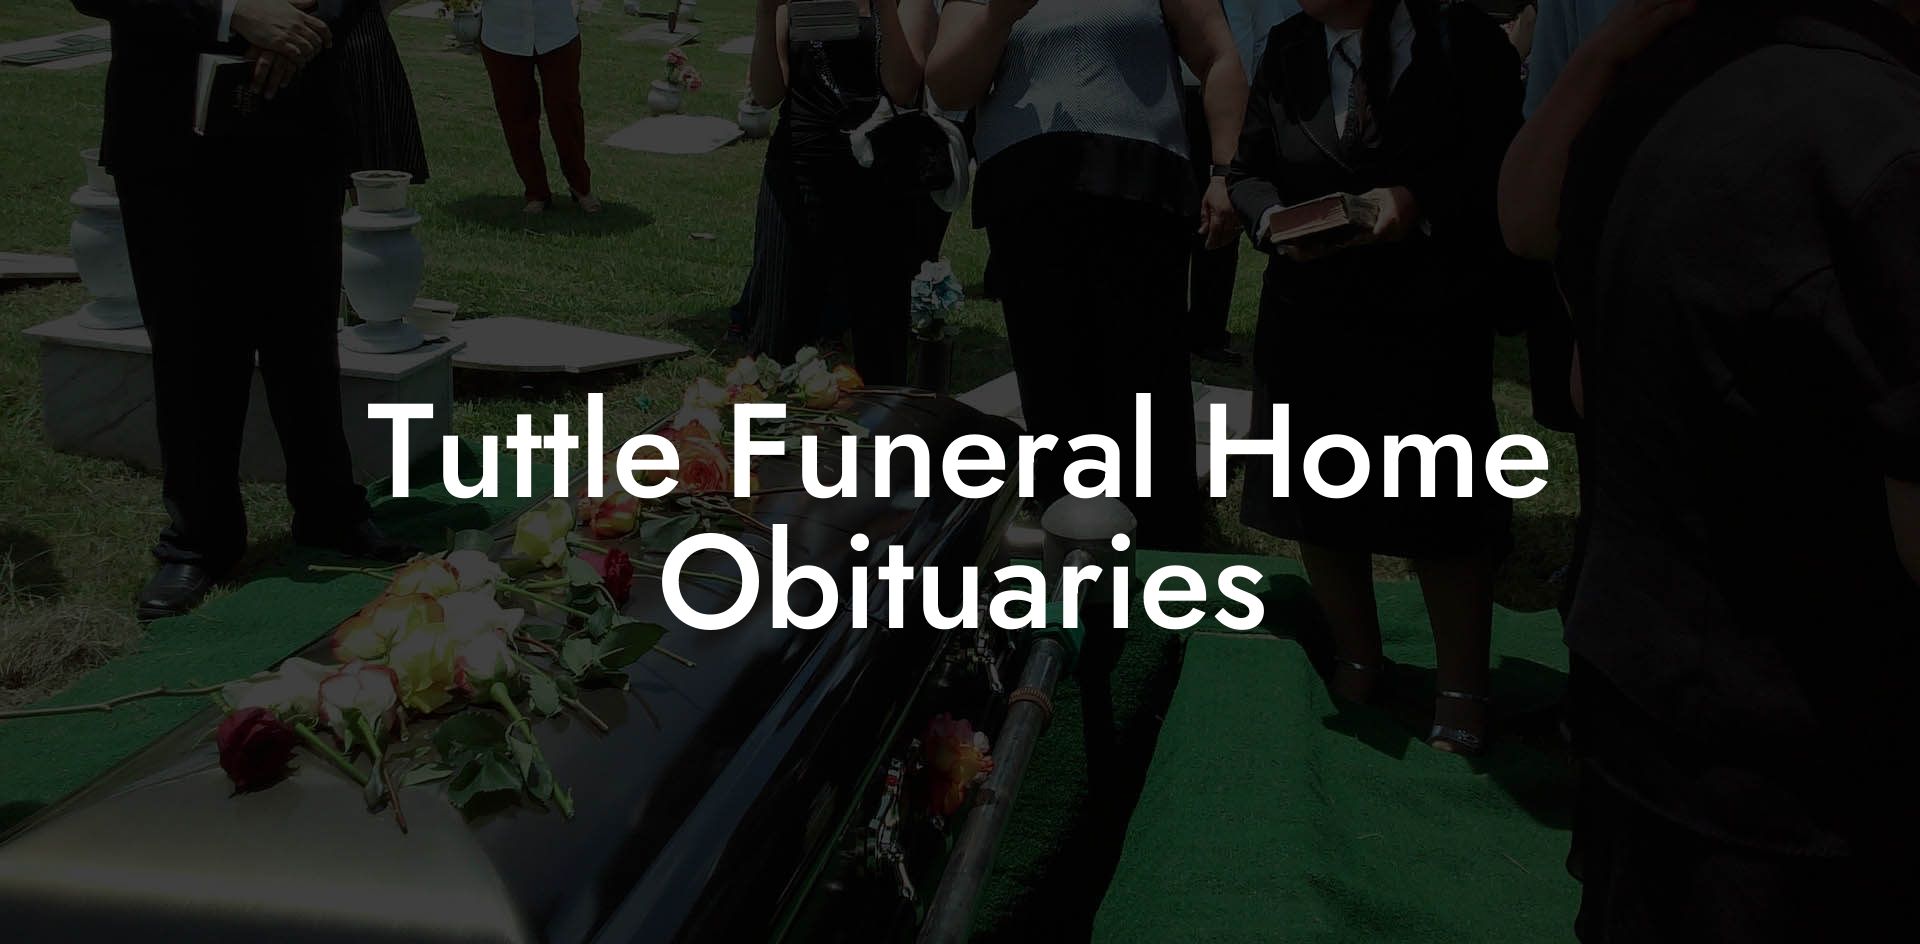 Tuttle Funeral Home Obituaries